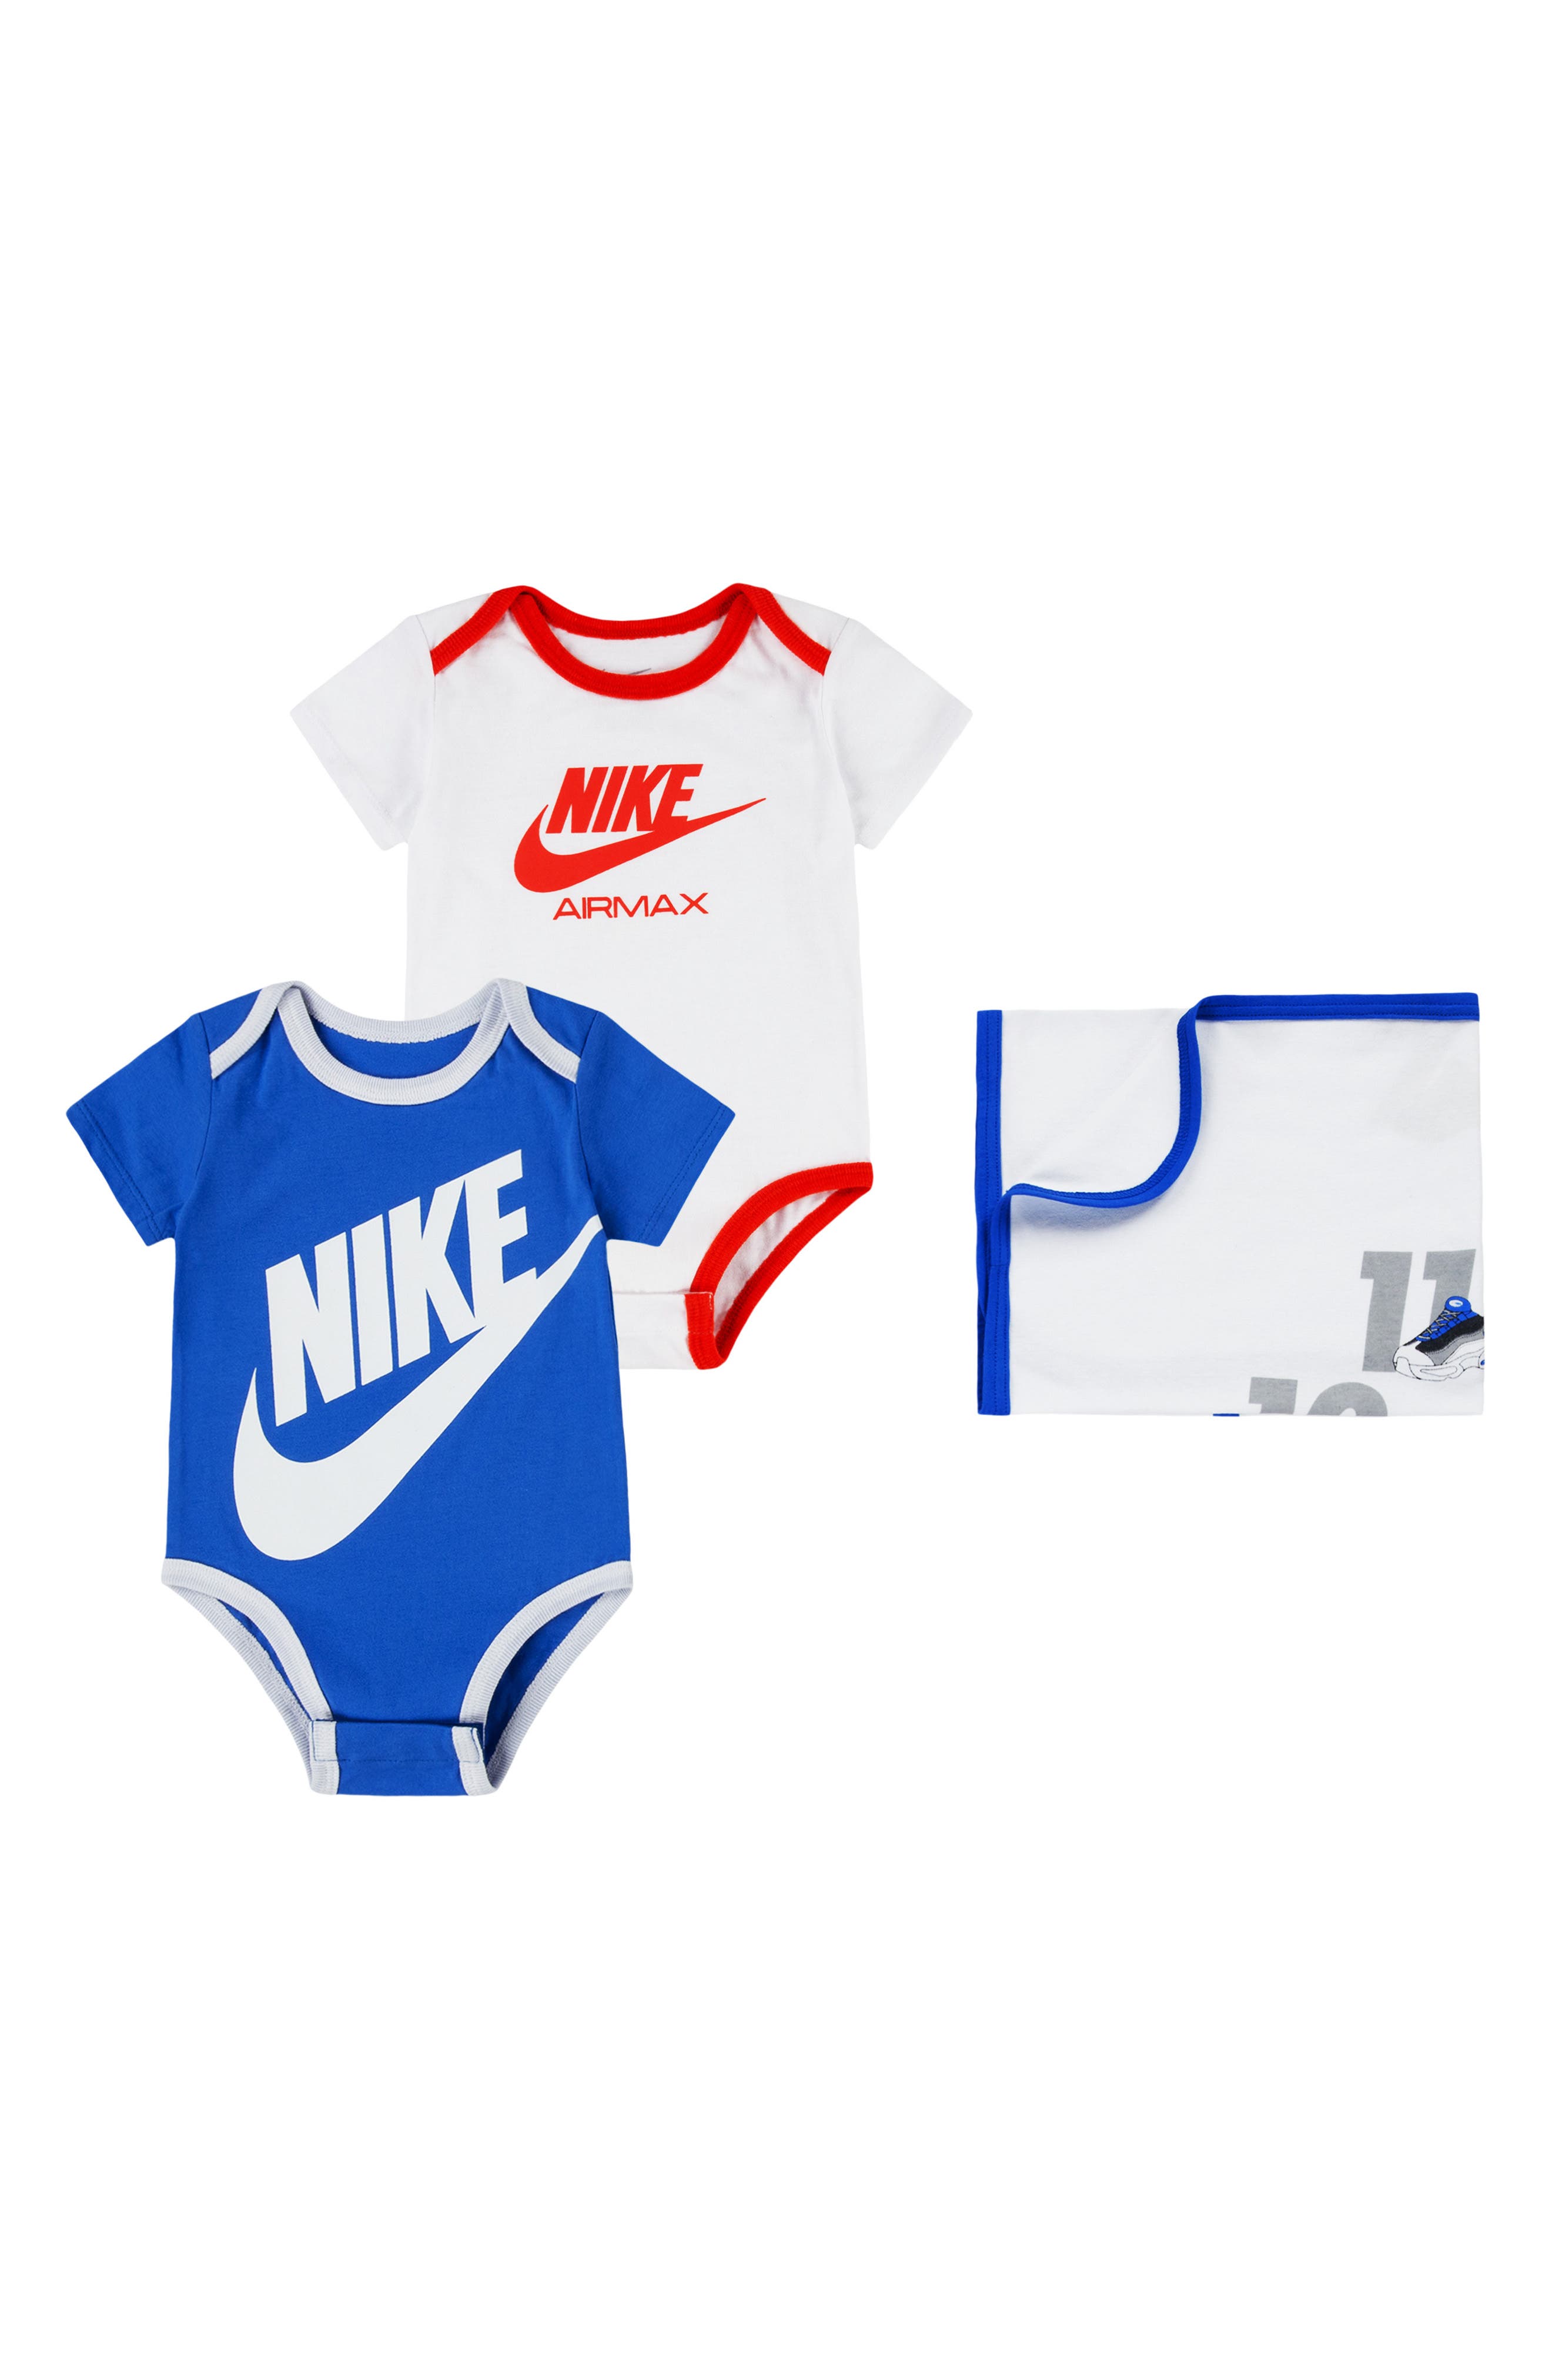 New and used Nike Baby Girls' Clothing for sale